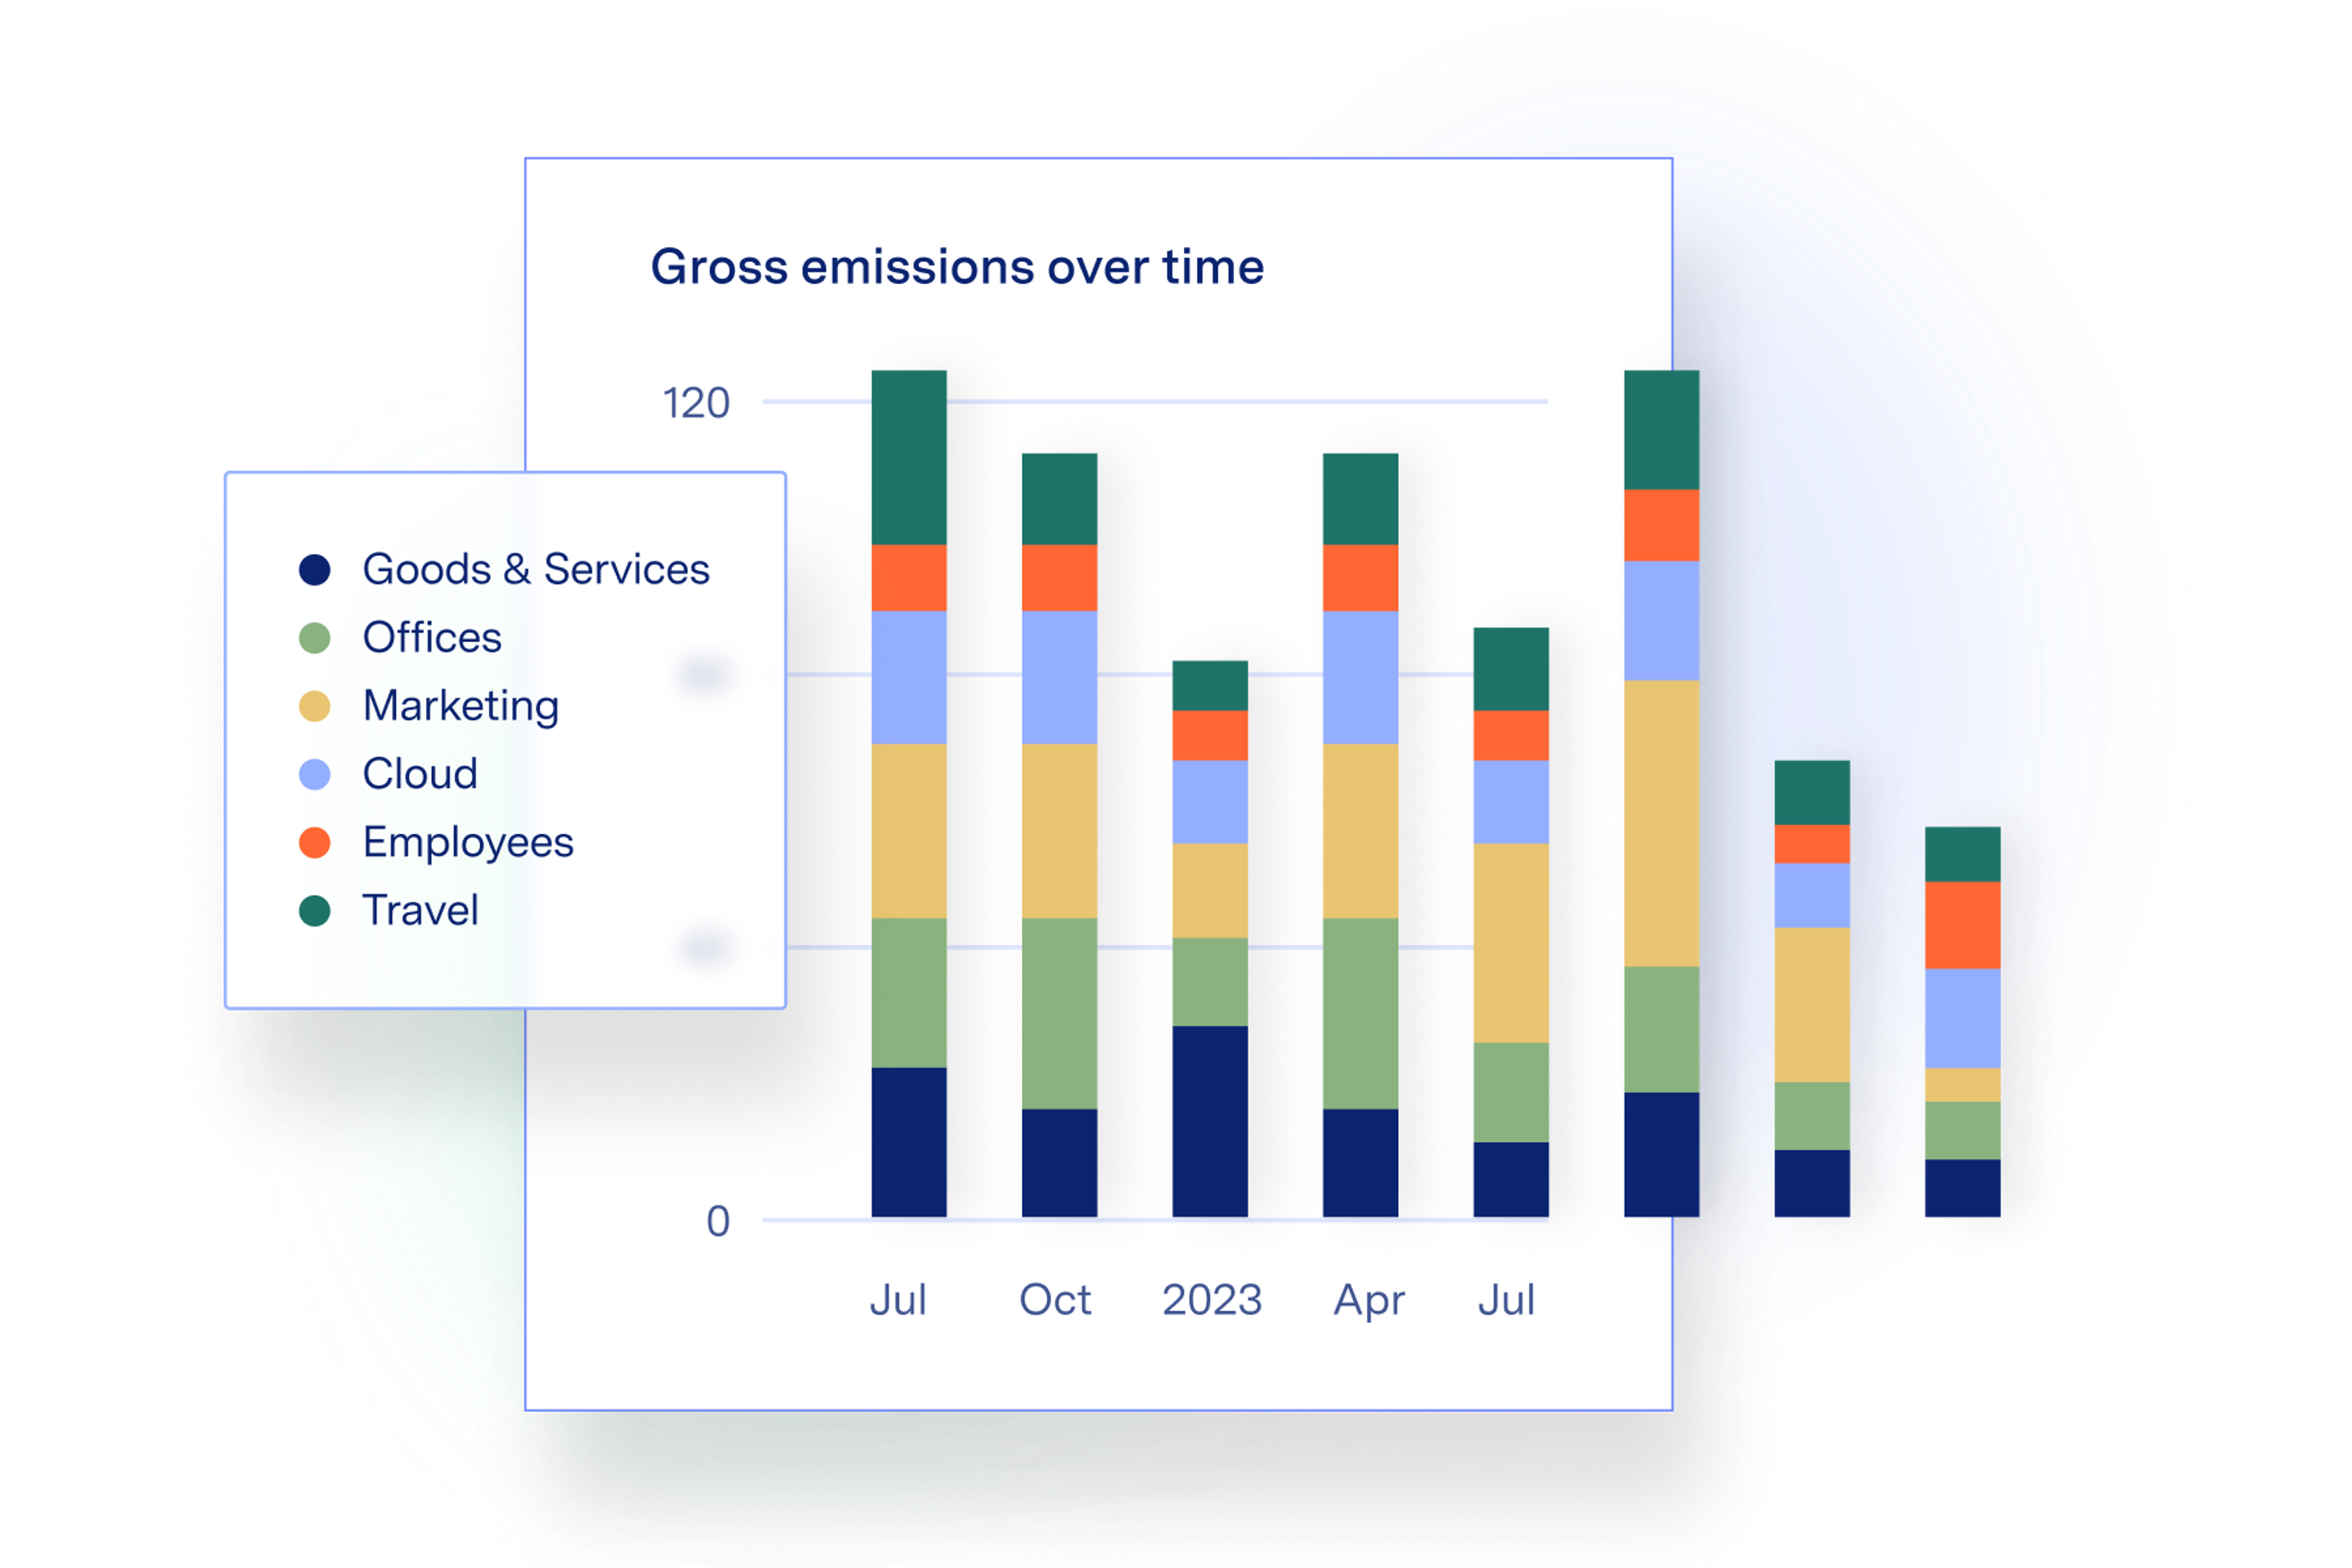 Gross emissions over time